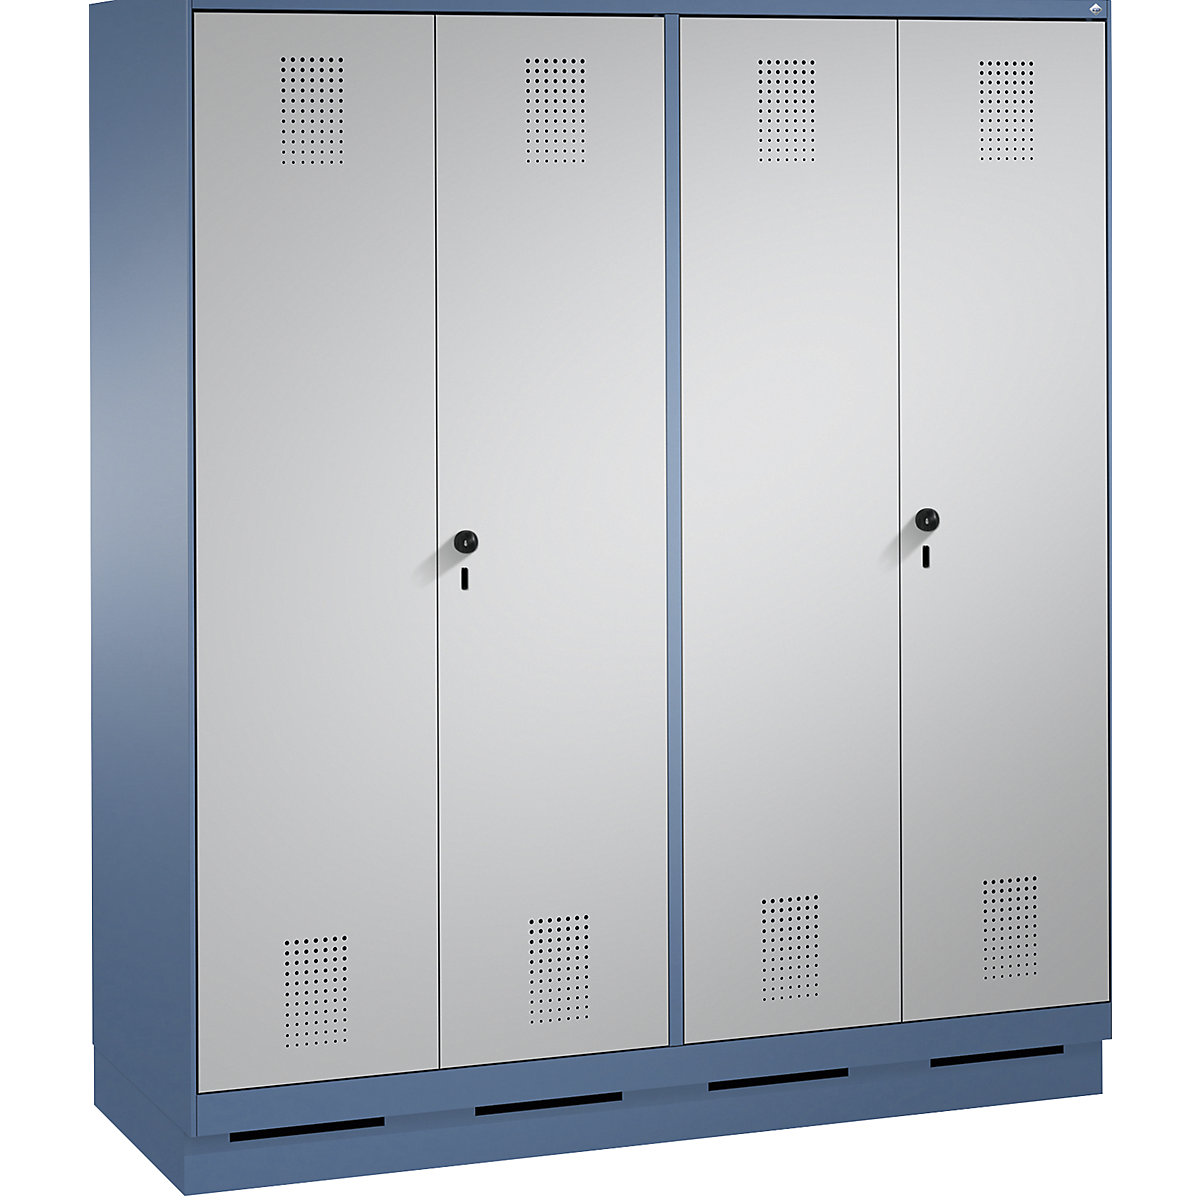 EVOLO cloakroom locker, doors close in the middle – C+P, 4 compartments, compartment width 400 mm, with plinth, distant blue / white aluminium-7